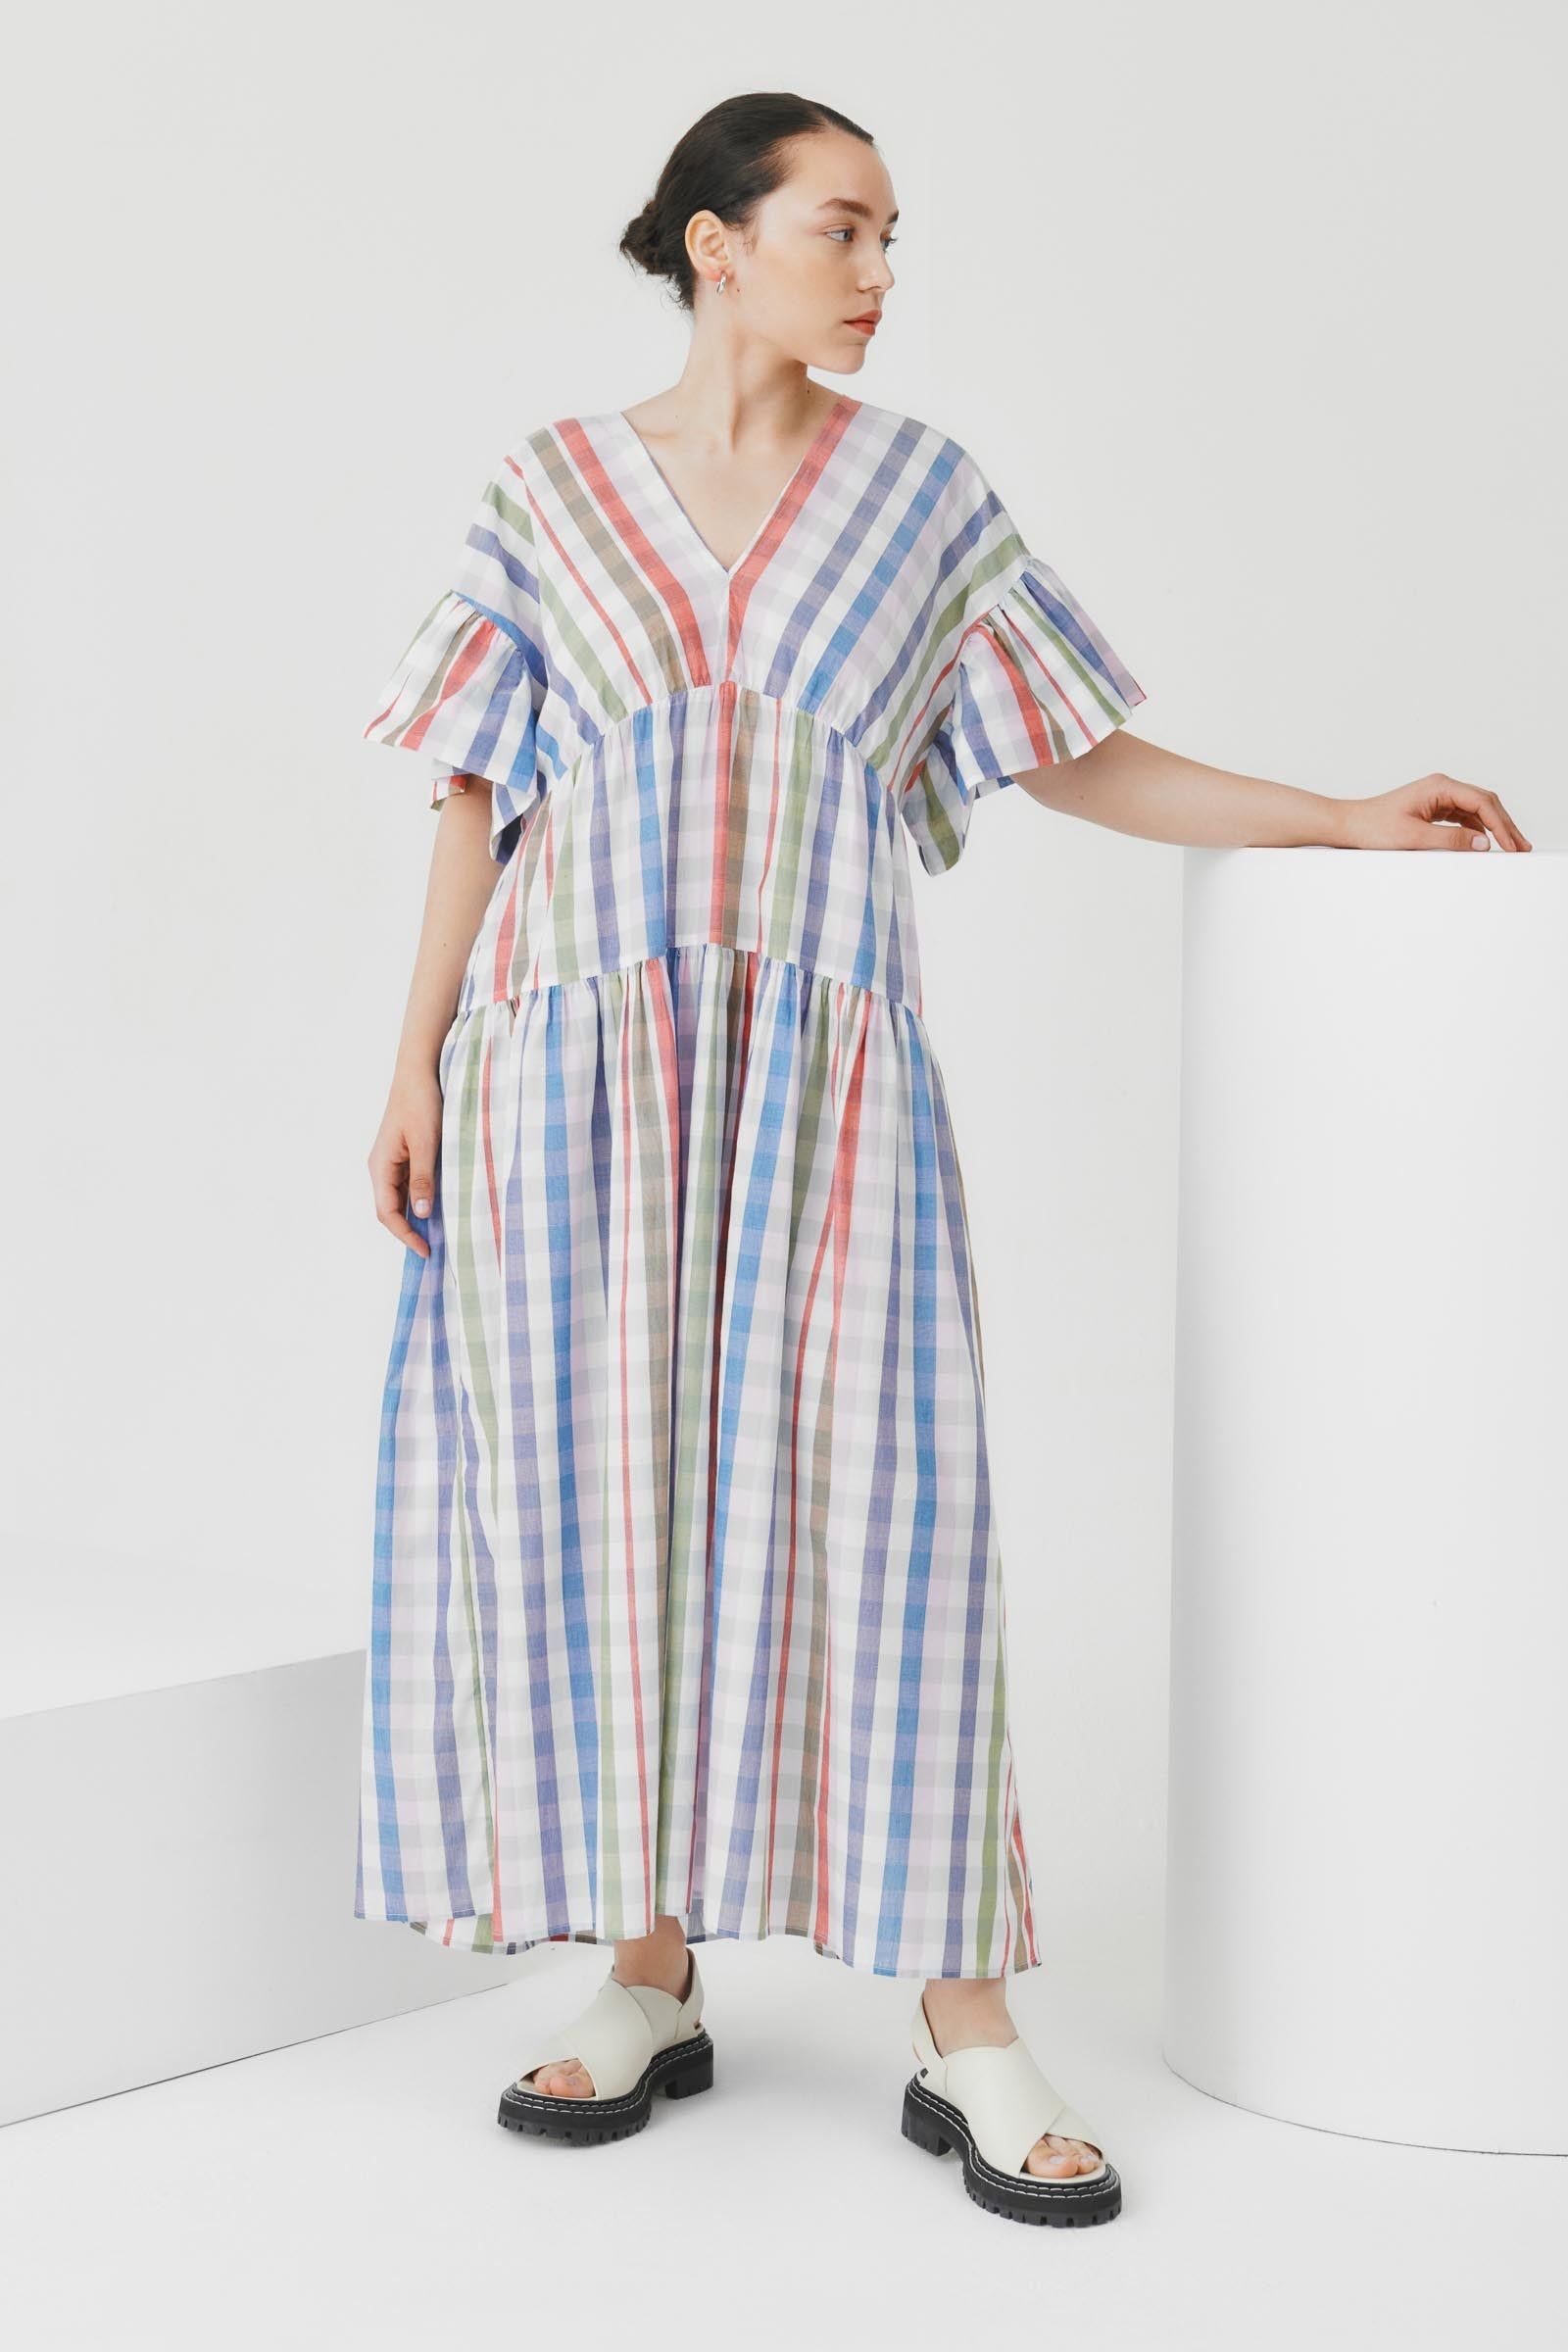 Product Image for Theory Dress, Watercolor Check